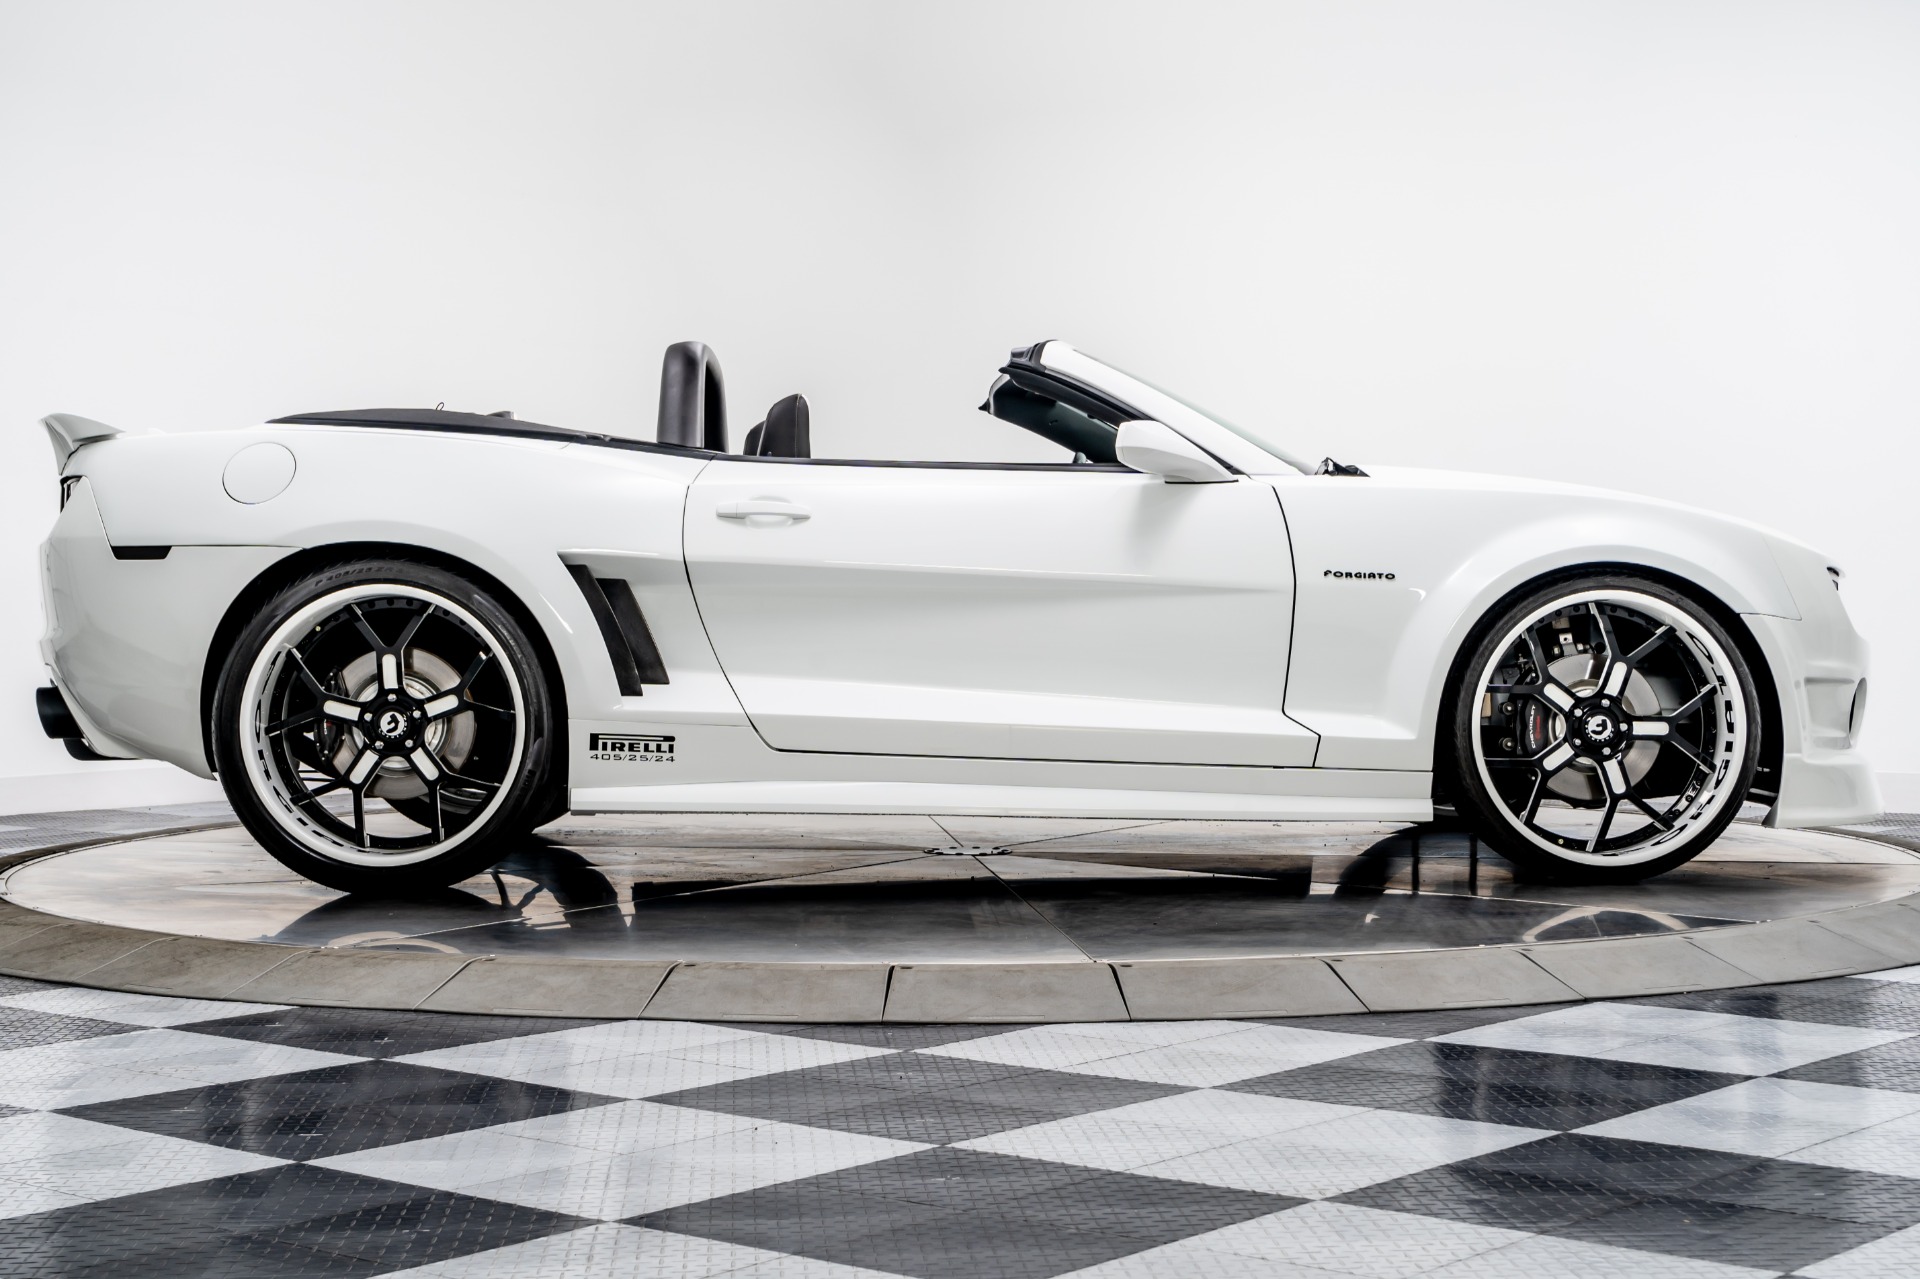 Used 2011 Chevrolet Camaro SS Forgiato Widebody Convertible For Sale (Sold)  | Marshall Goldman Motor Sales Stock #W20992